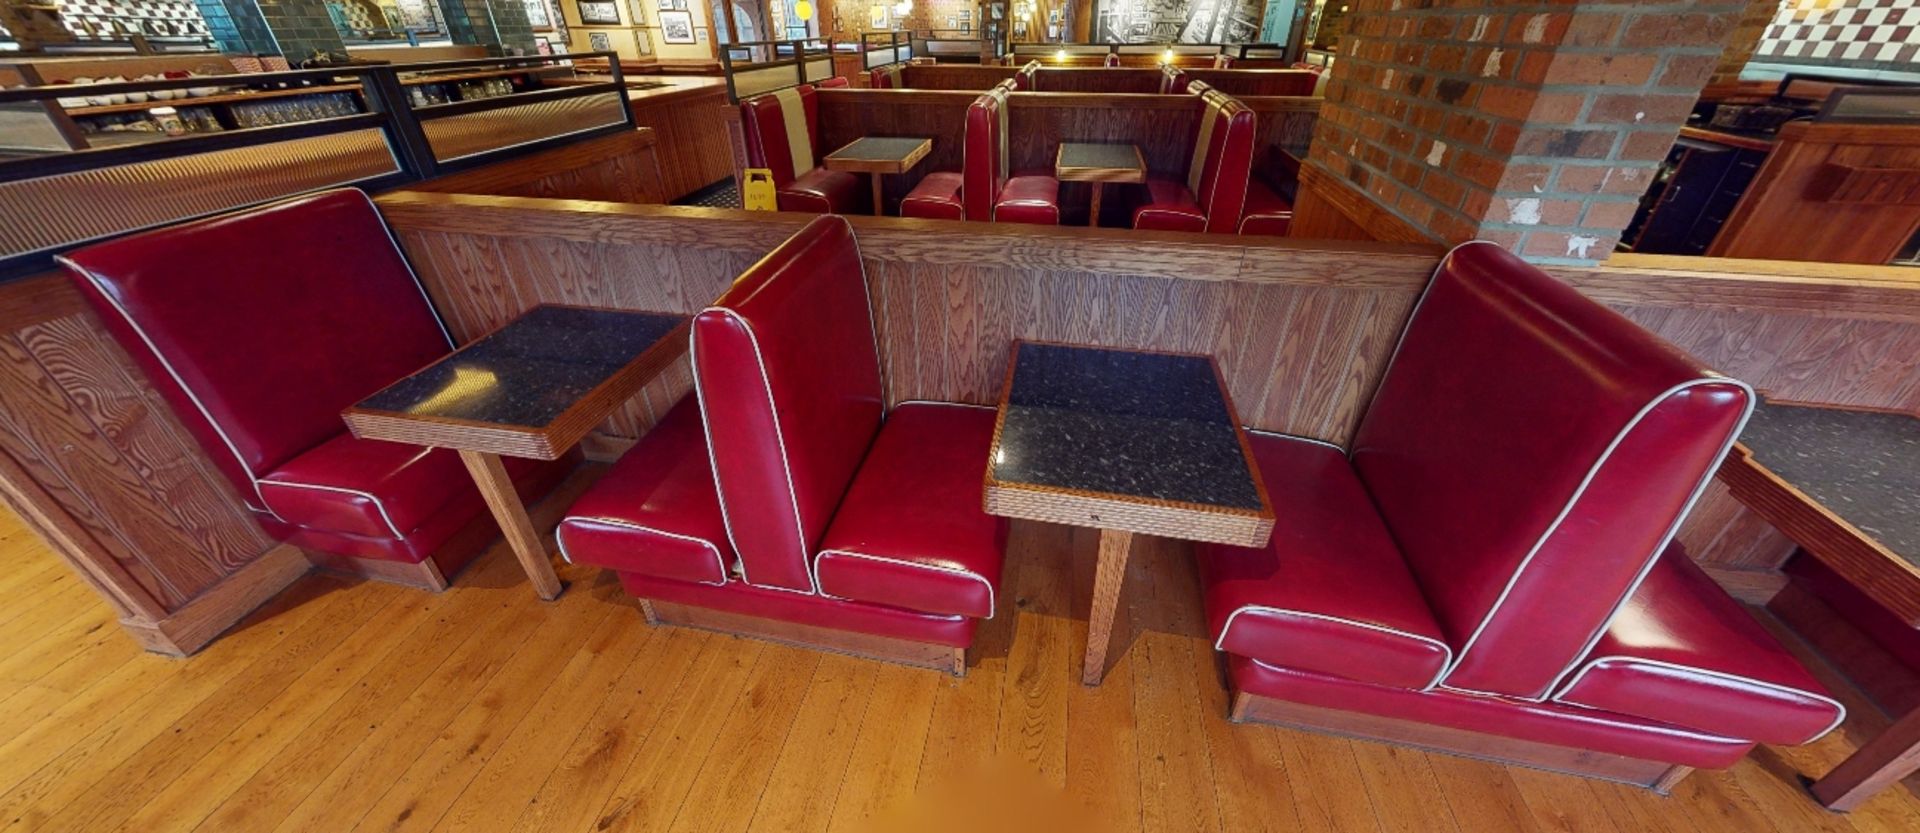 Selection of Single Seating Benches and Dining Tables to Seat Upto 8 Persons - Retro - 1950's - Image 4 of 9